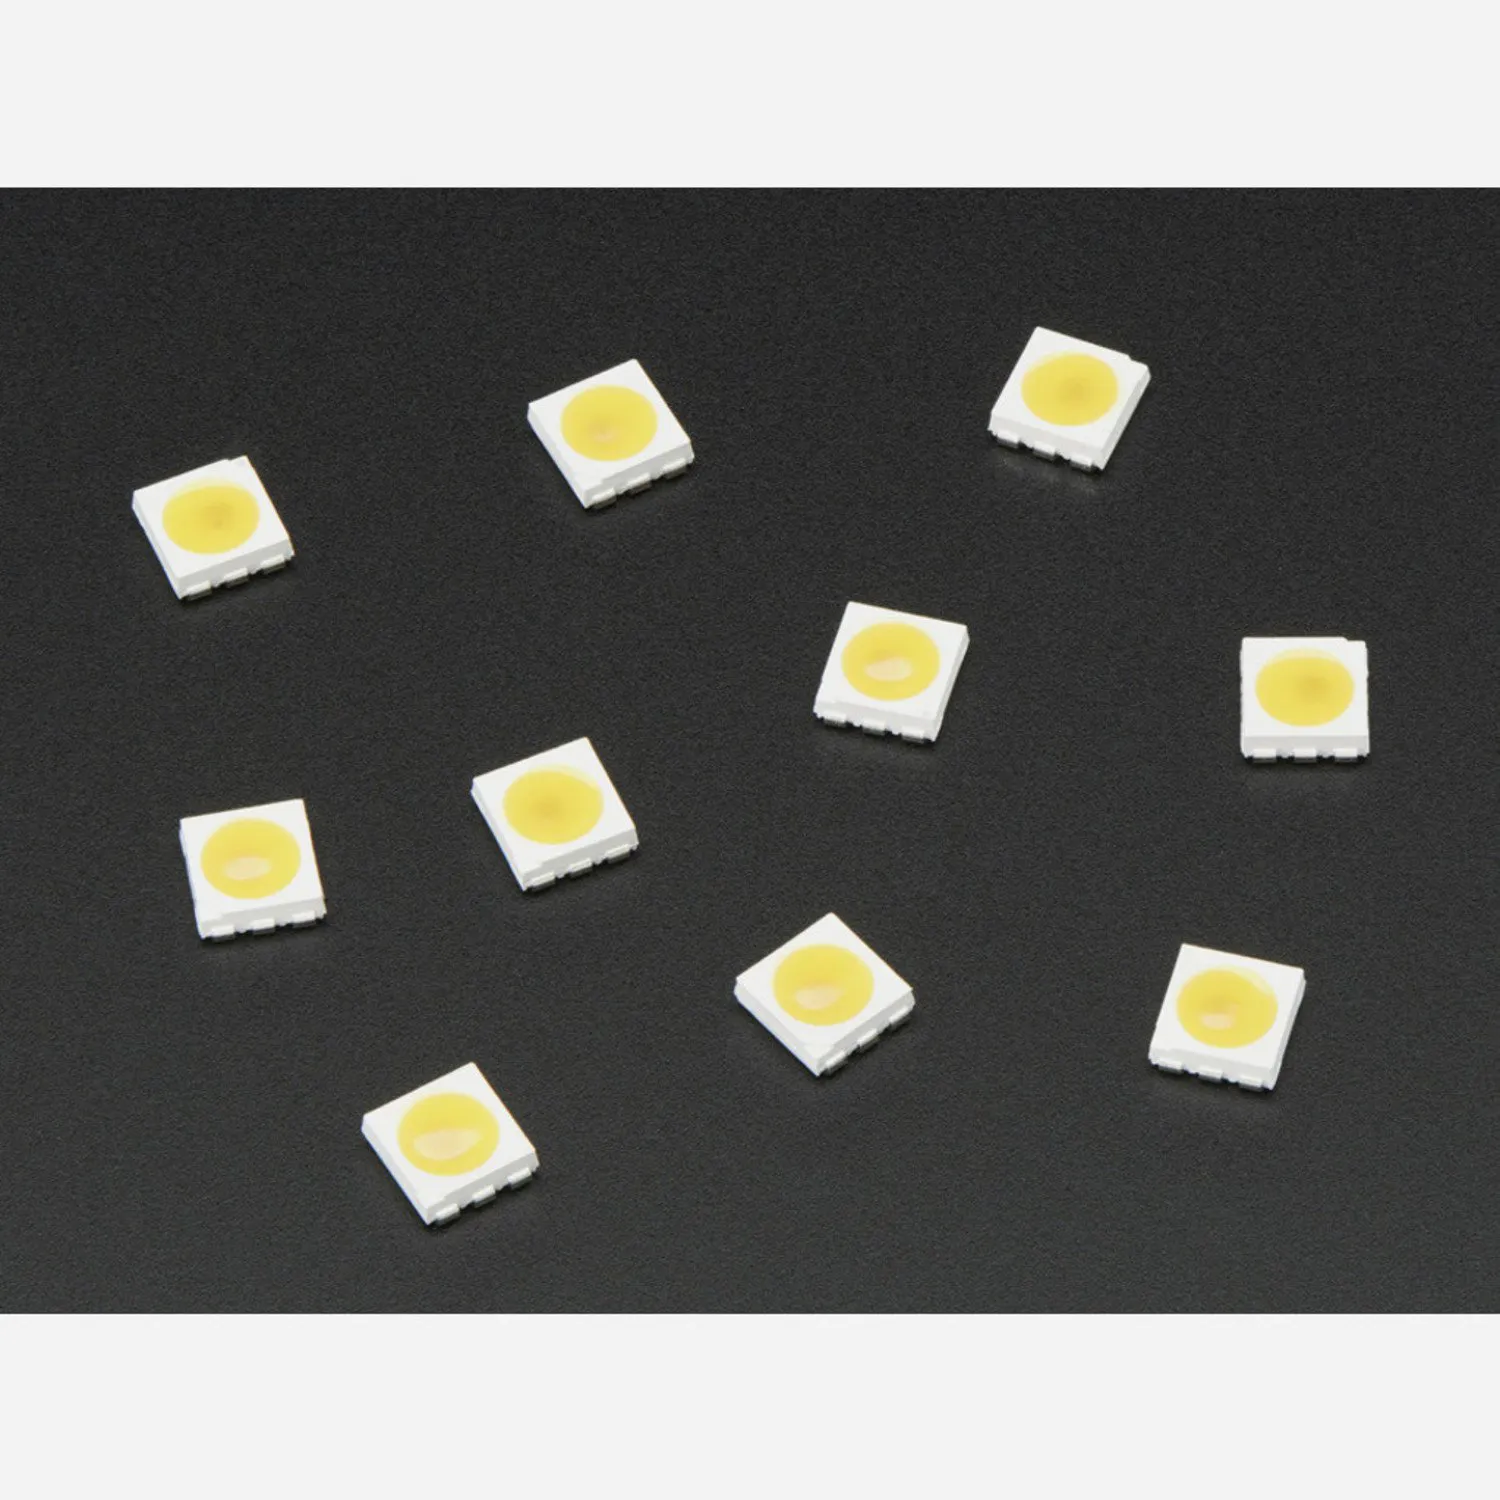 Photo of APA102 5050 Warm White LED w/ Integrated Driver Chip - 10 Pack [~3000K]